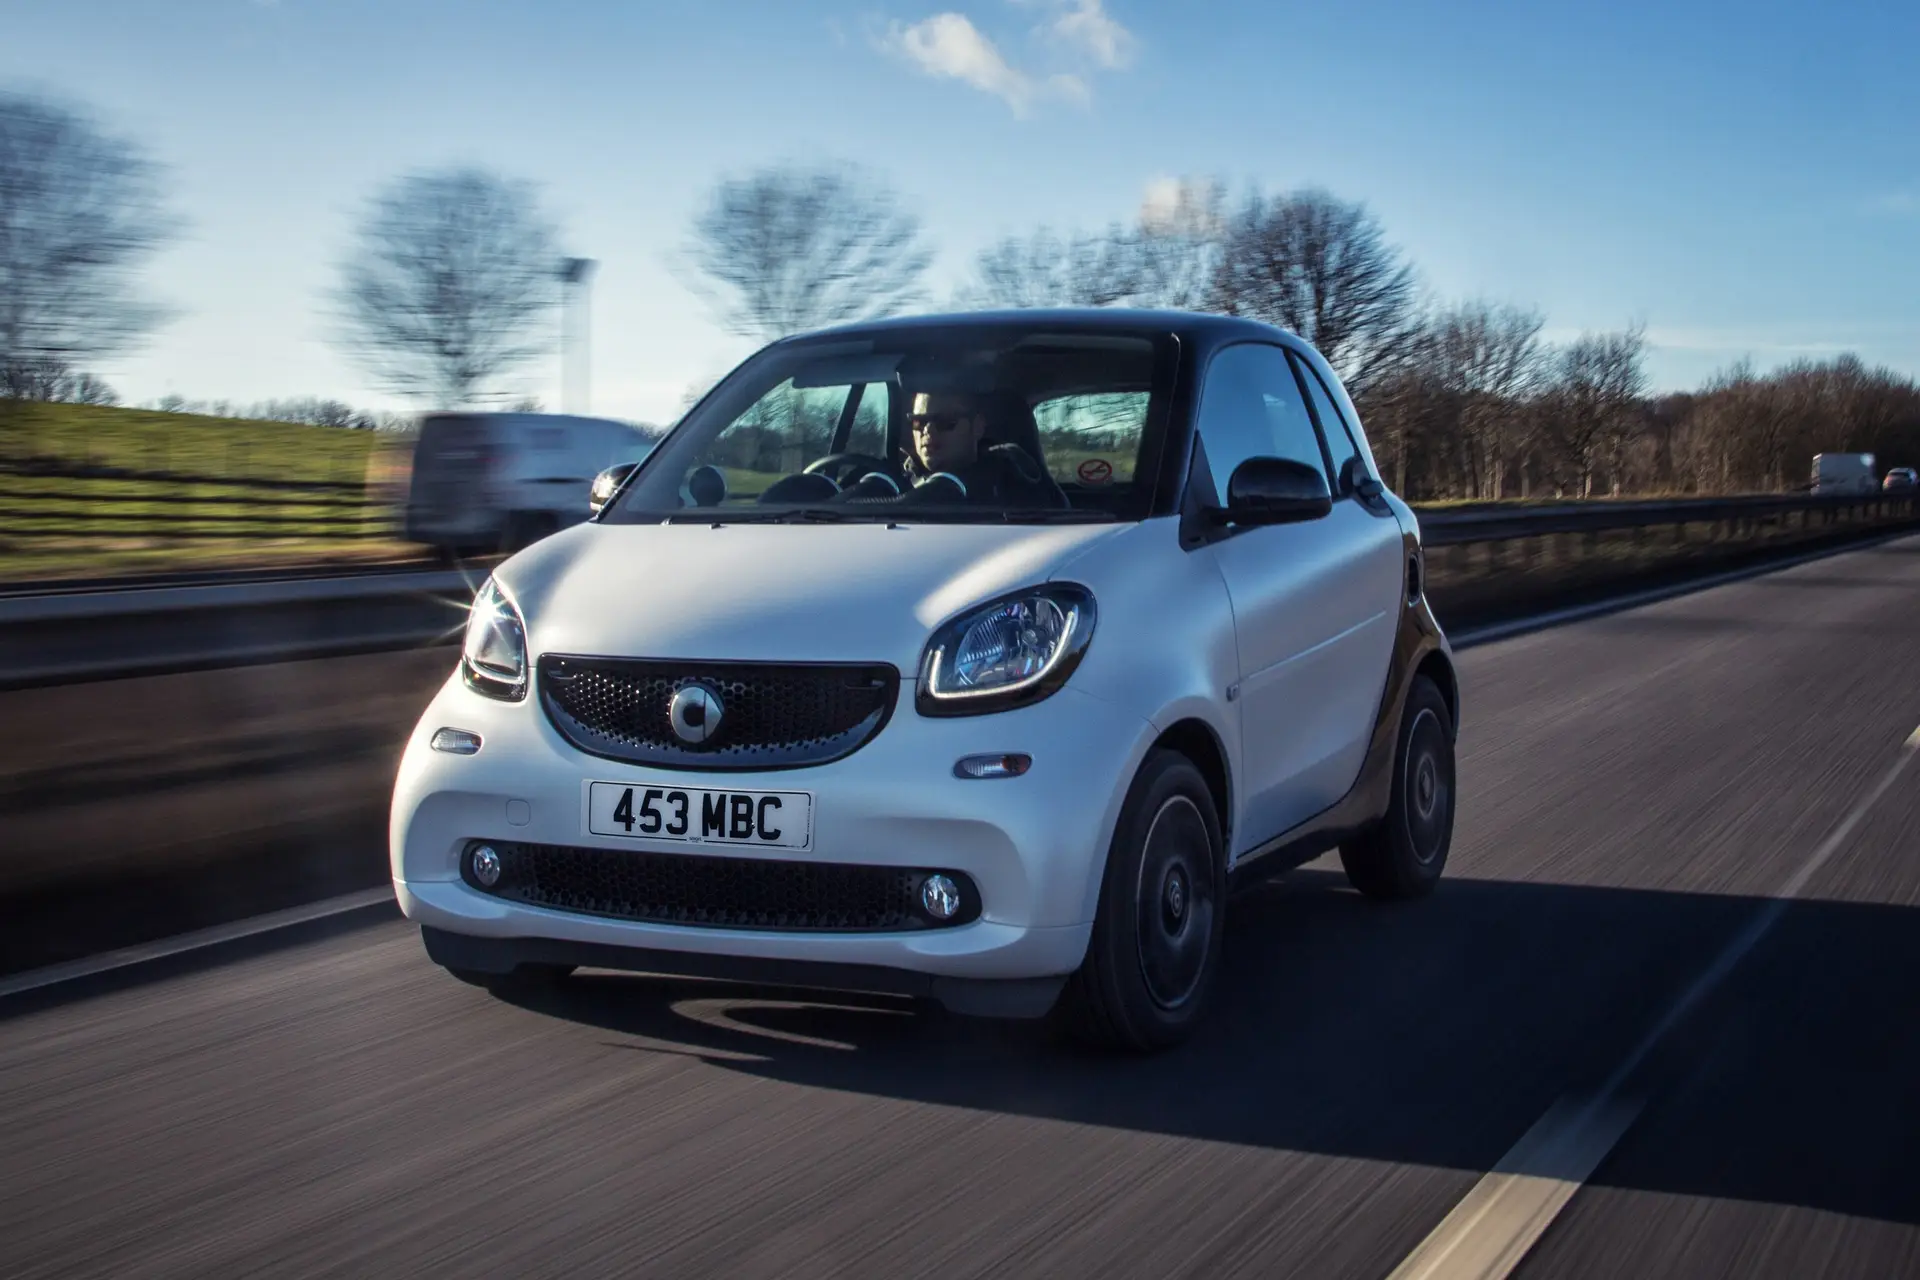 Smart Fortwo Coupe (2014-2019) Review: exterior front three quarter photo of the Smart Fortwo Coupe on the road